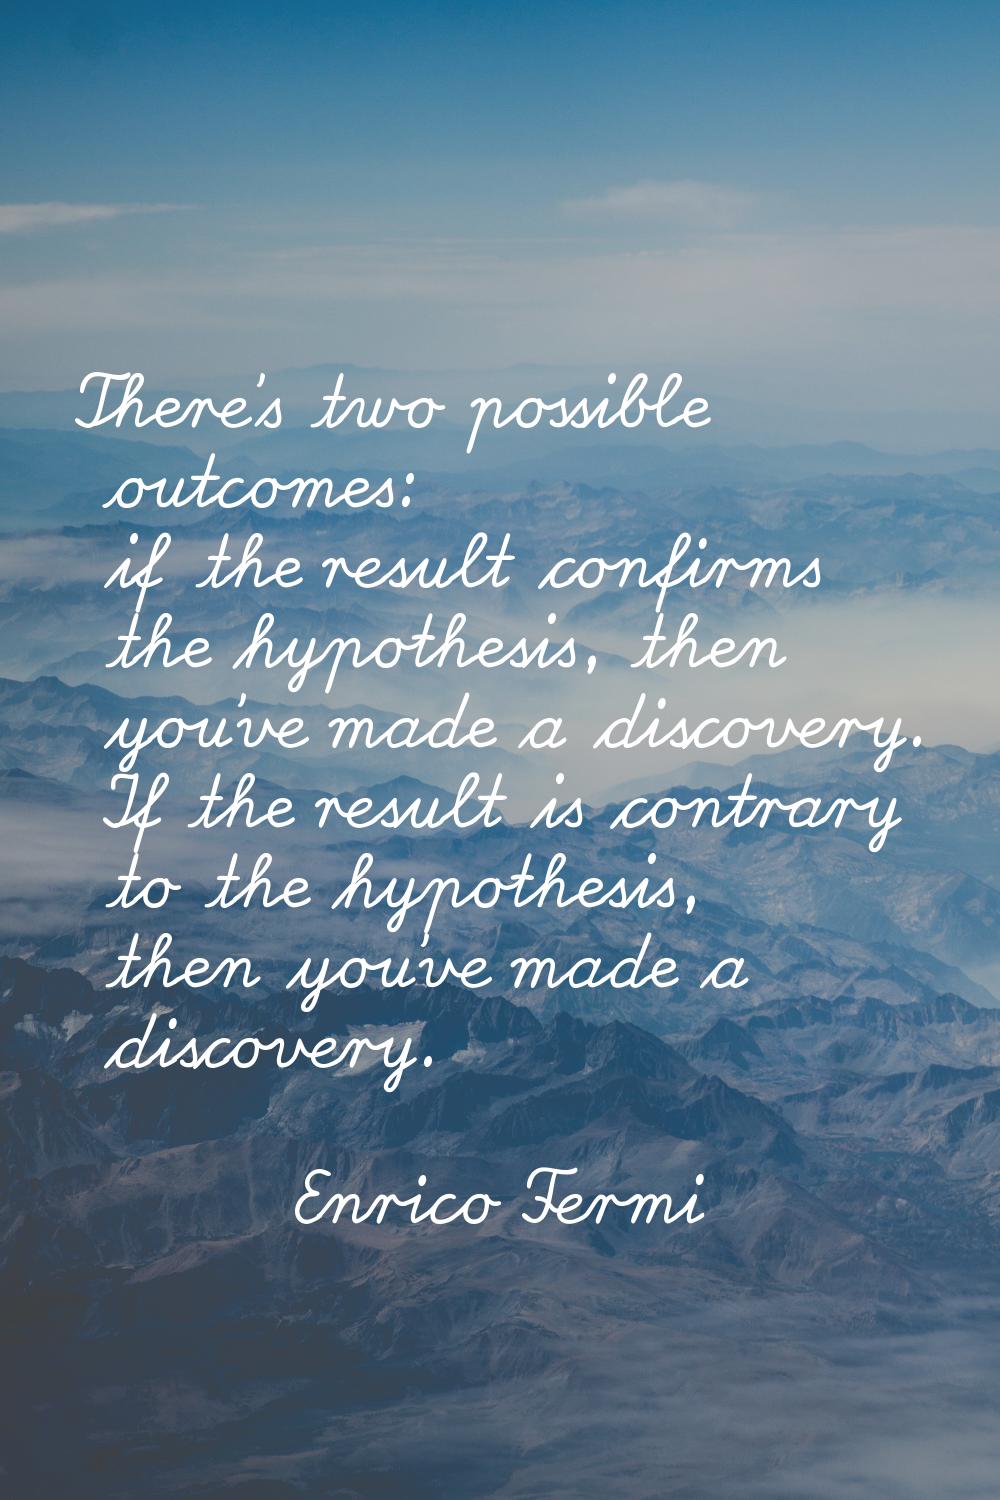 There's two possible outcomes: if the result confirms the hypothesis, then you've made a discovery.